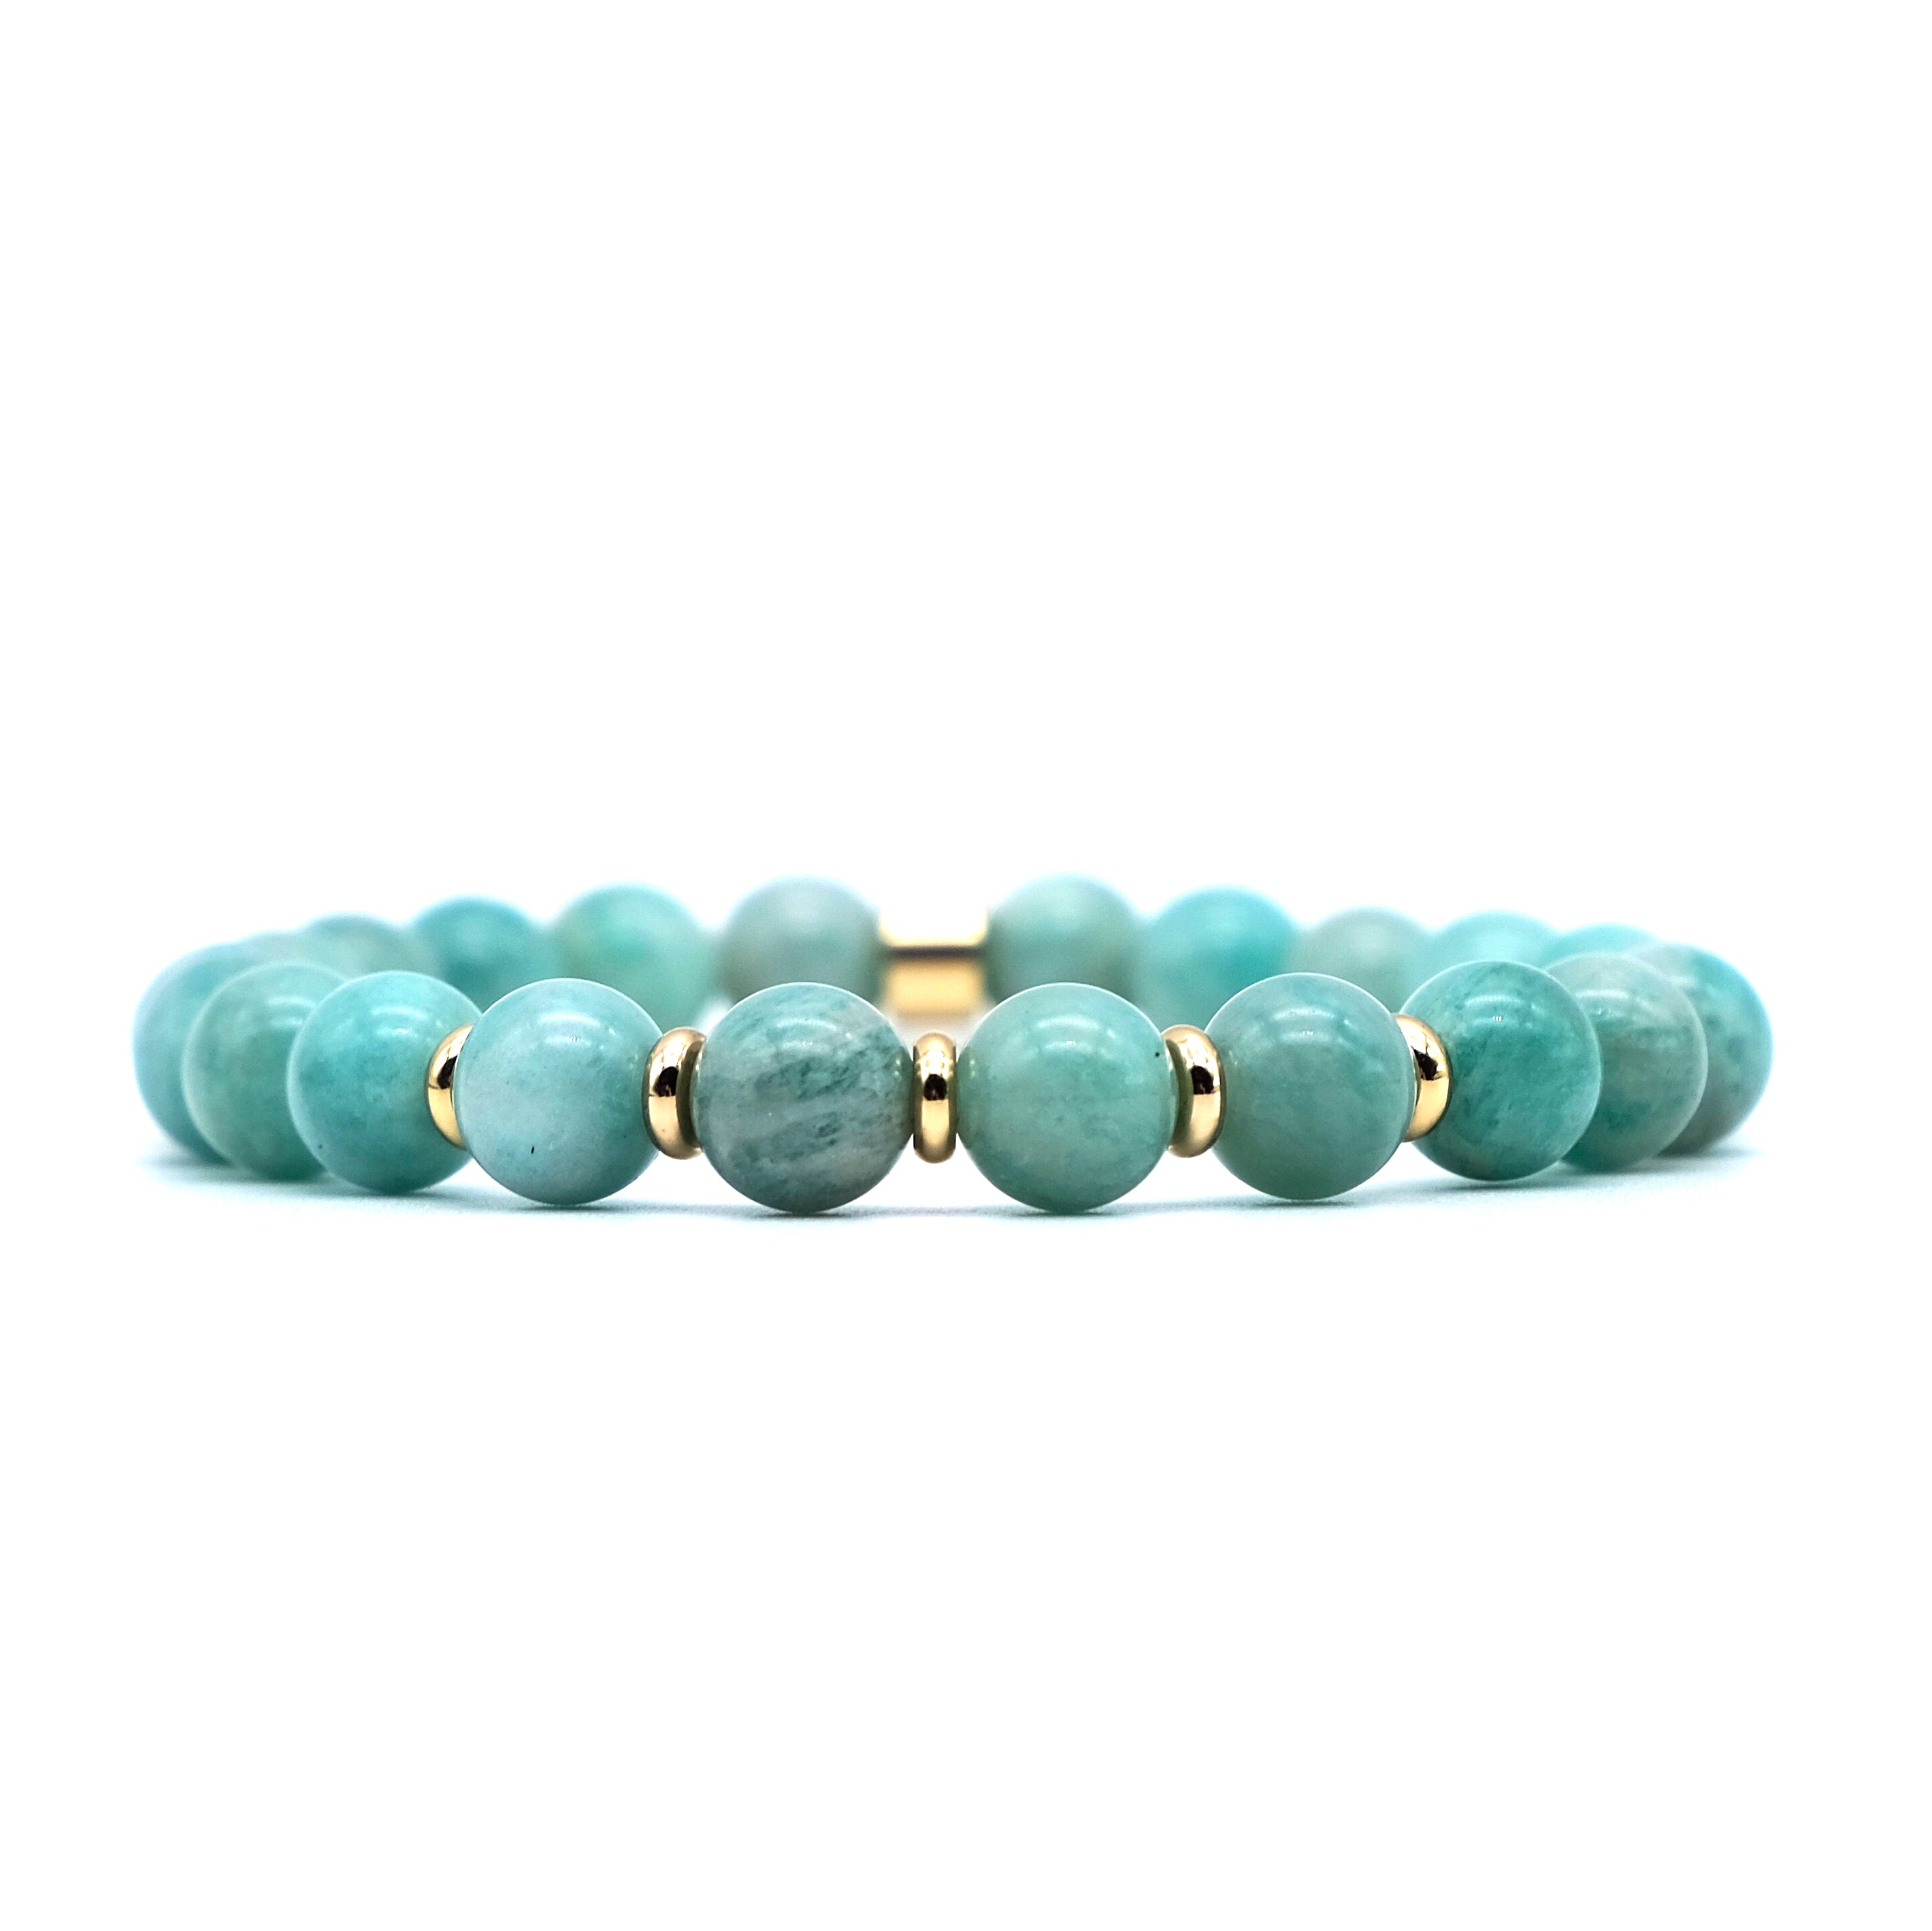 Amazonite bracelet with 18ct gold plated accessories